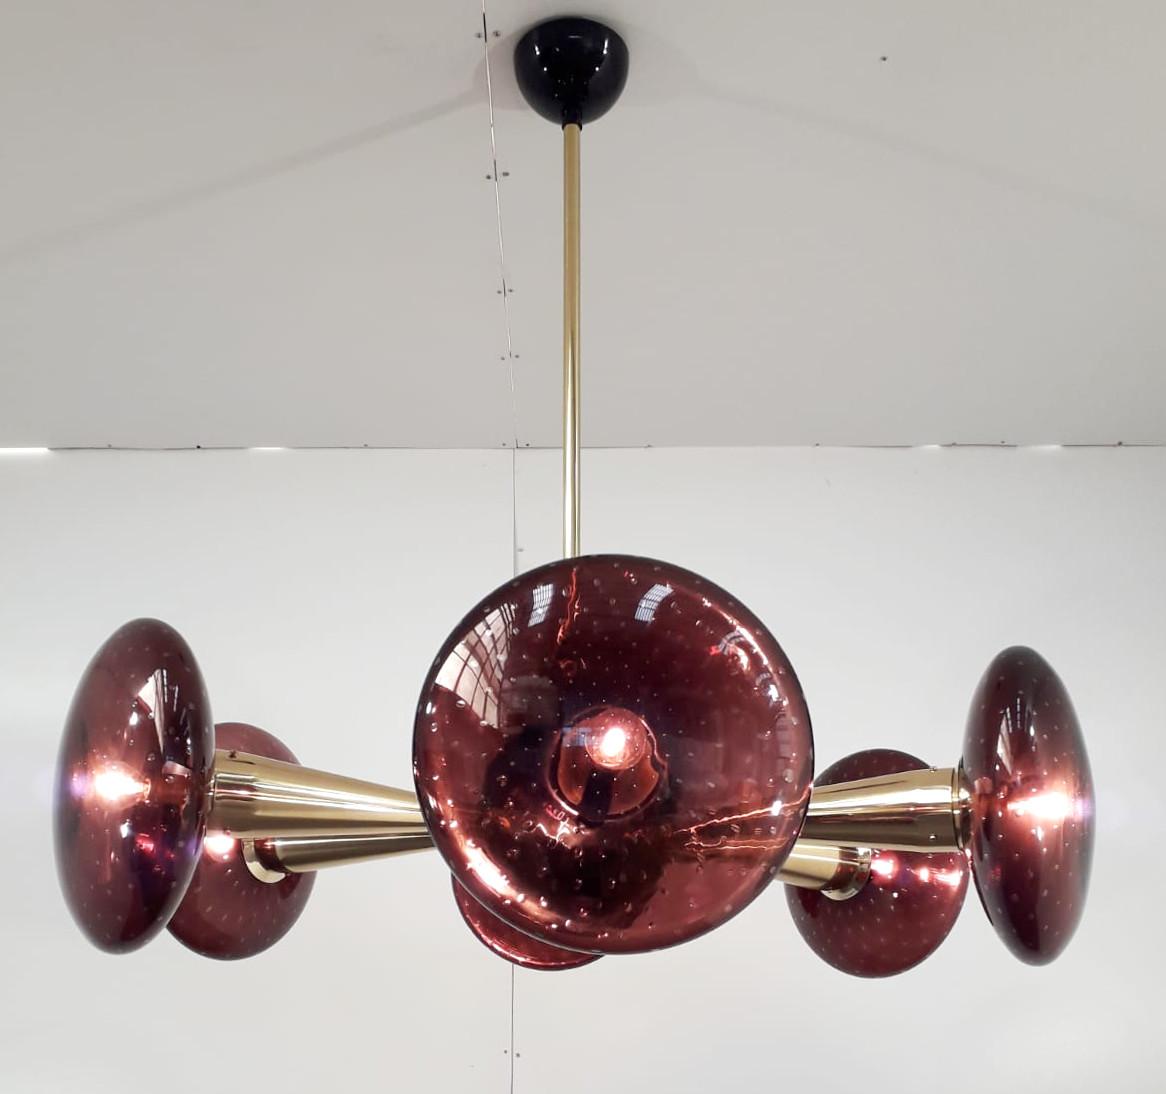 Italian chandelier with amethyst Murano glass shades hand blown with bubbles inside the glass using Bollicine technique, mounted on newly made polished brass frame with black enameled center and ceiling canopy / Designed by Fabio Bergomi for Fabio